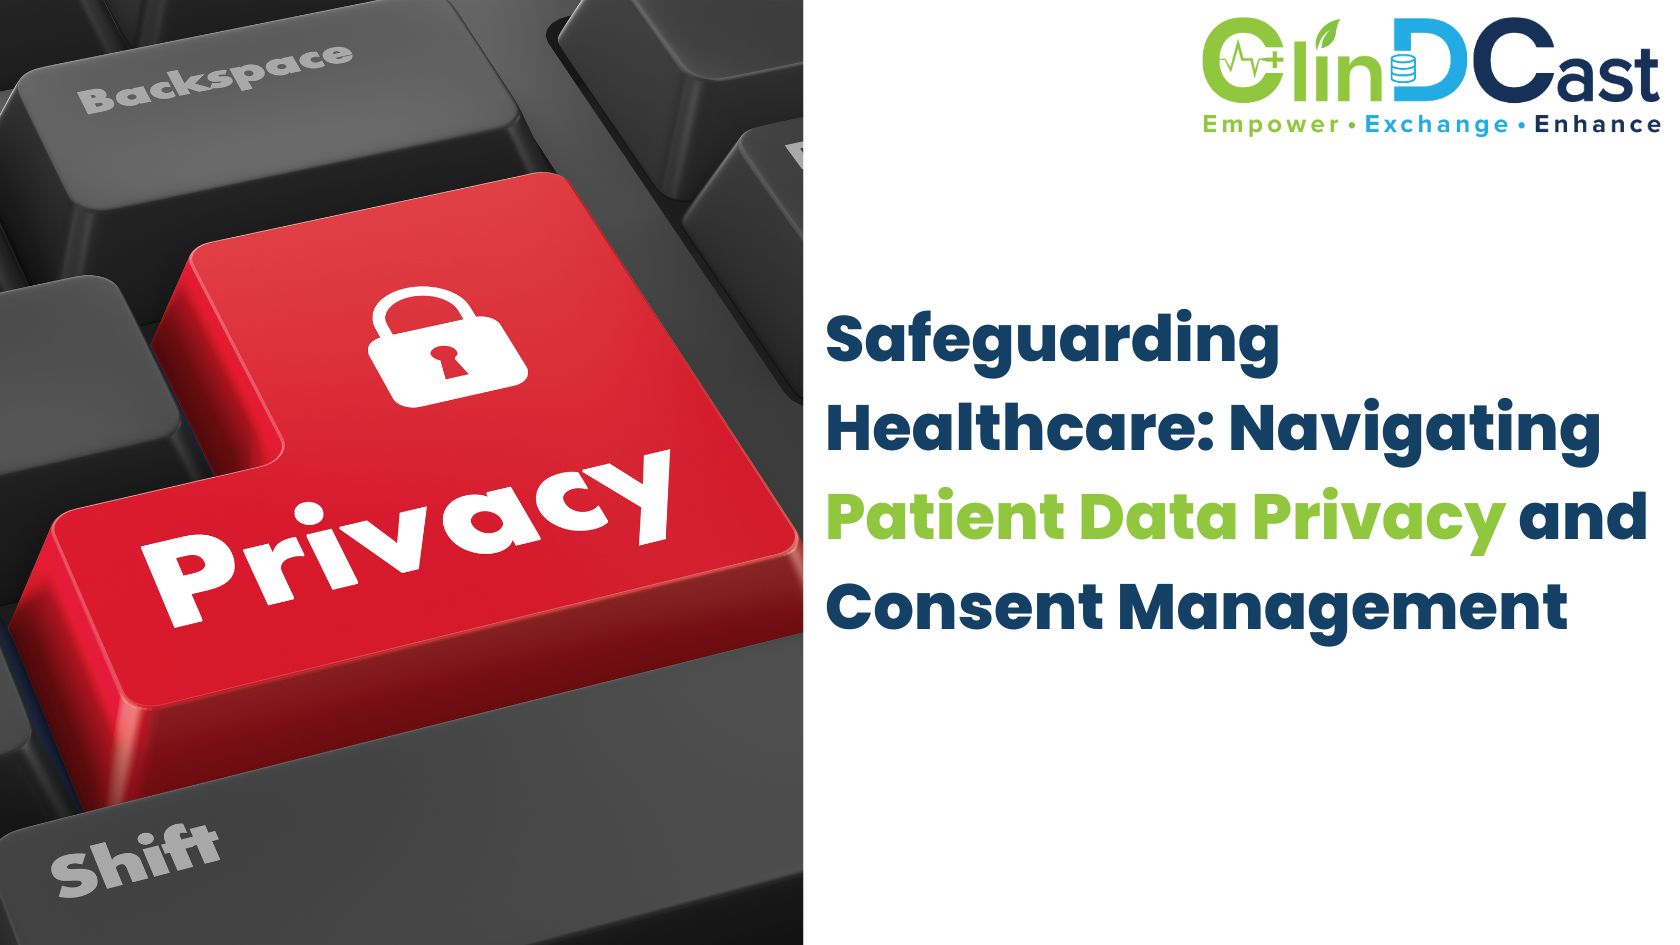 Safeguarding Healthcare: Navigating Patient Data Privacy and Consent Management